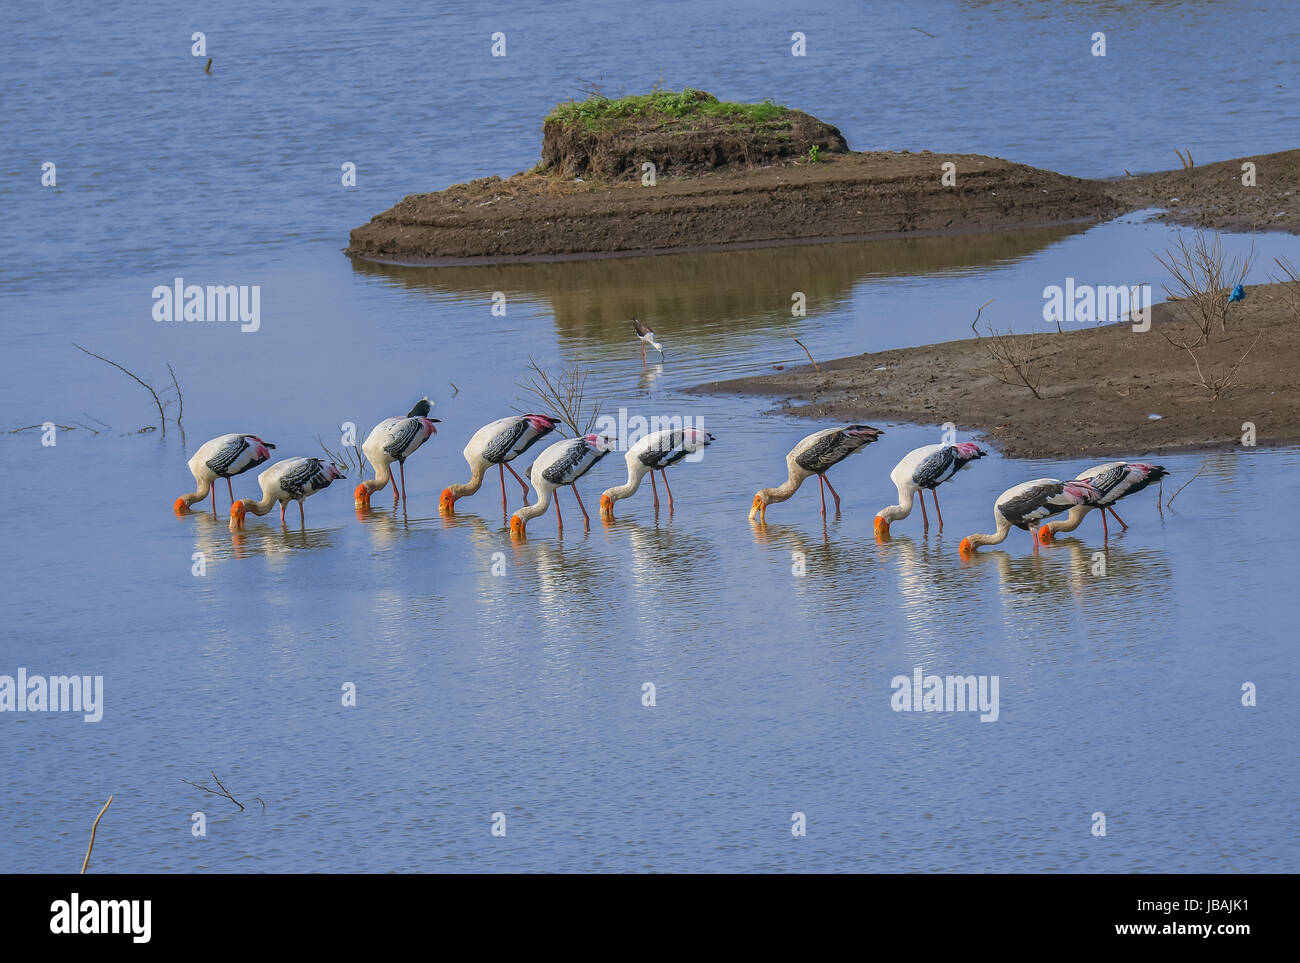 colony of painted storks Stock Photo